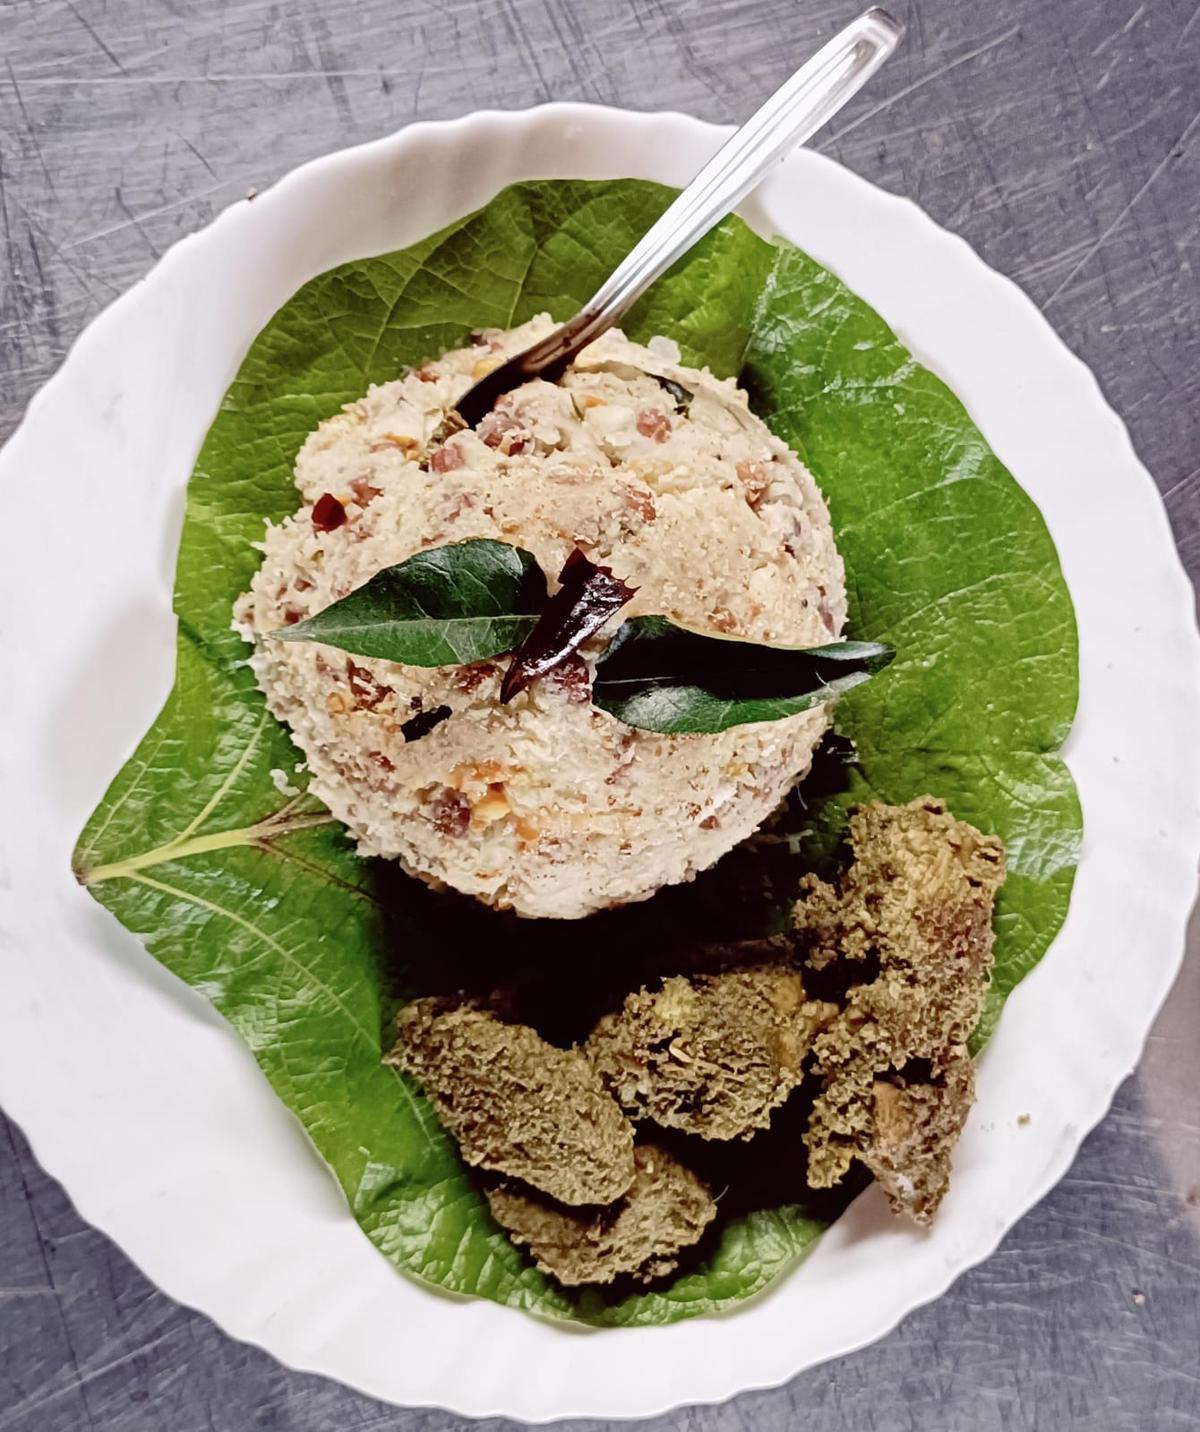 Solai milan, a tribal dish from Attappady. Chicken pieces cooked in bamboo steamer is served with a millet-based dish.